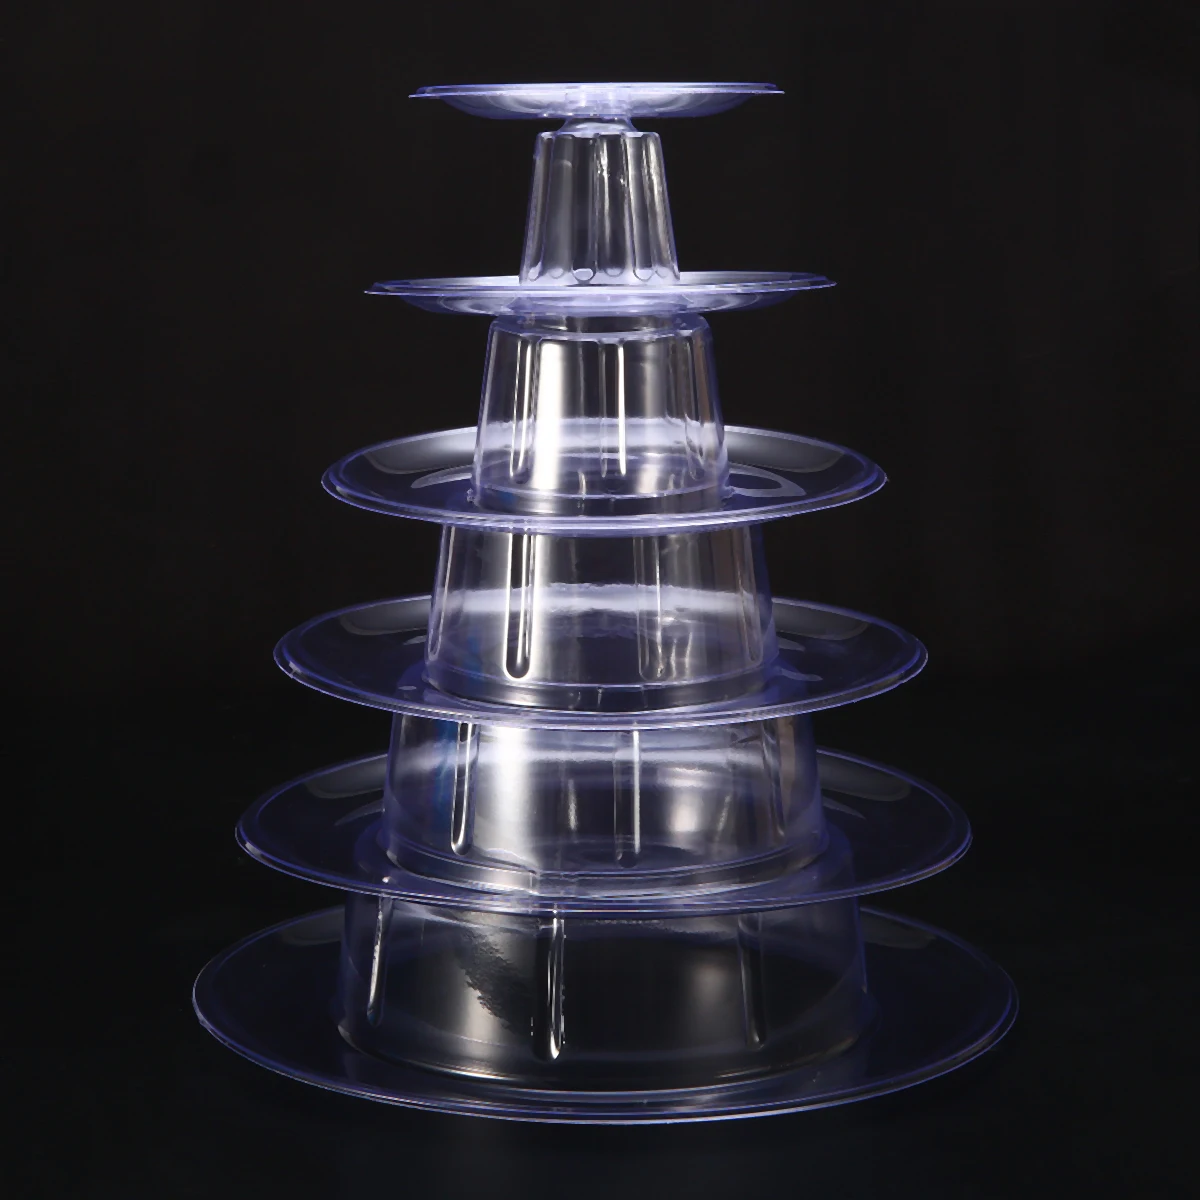 6 Tiers Round Tower Cake Stand Macaron Display Rack for Wedding Birthday Party 